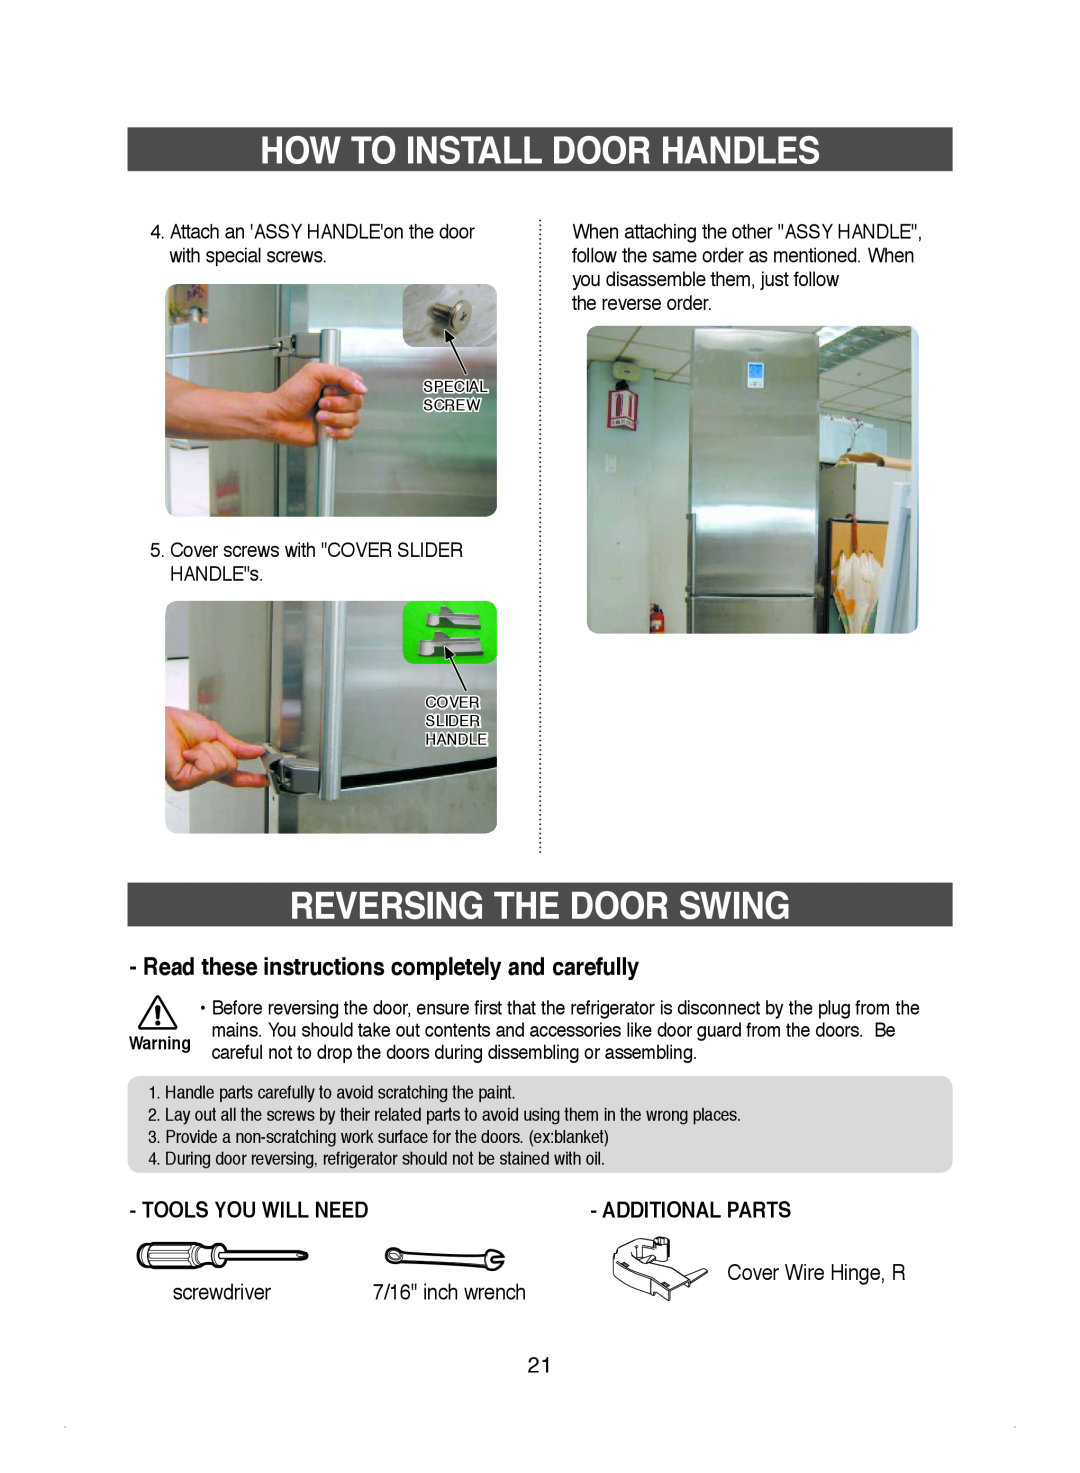 Samsung DA99-01220J manual Reversing The Door Swing, Read these instructions completely and carefully, Additional Parts 